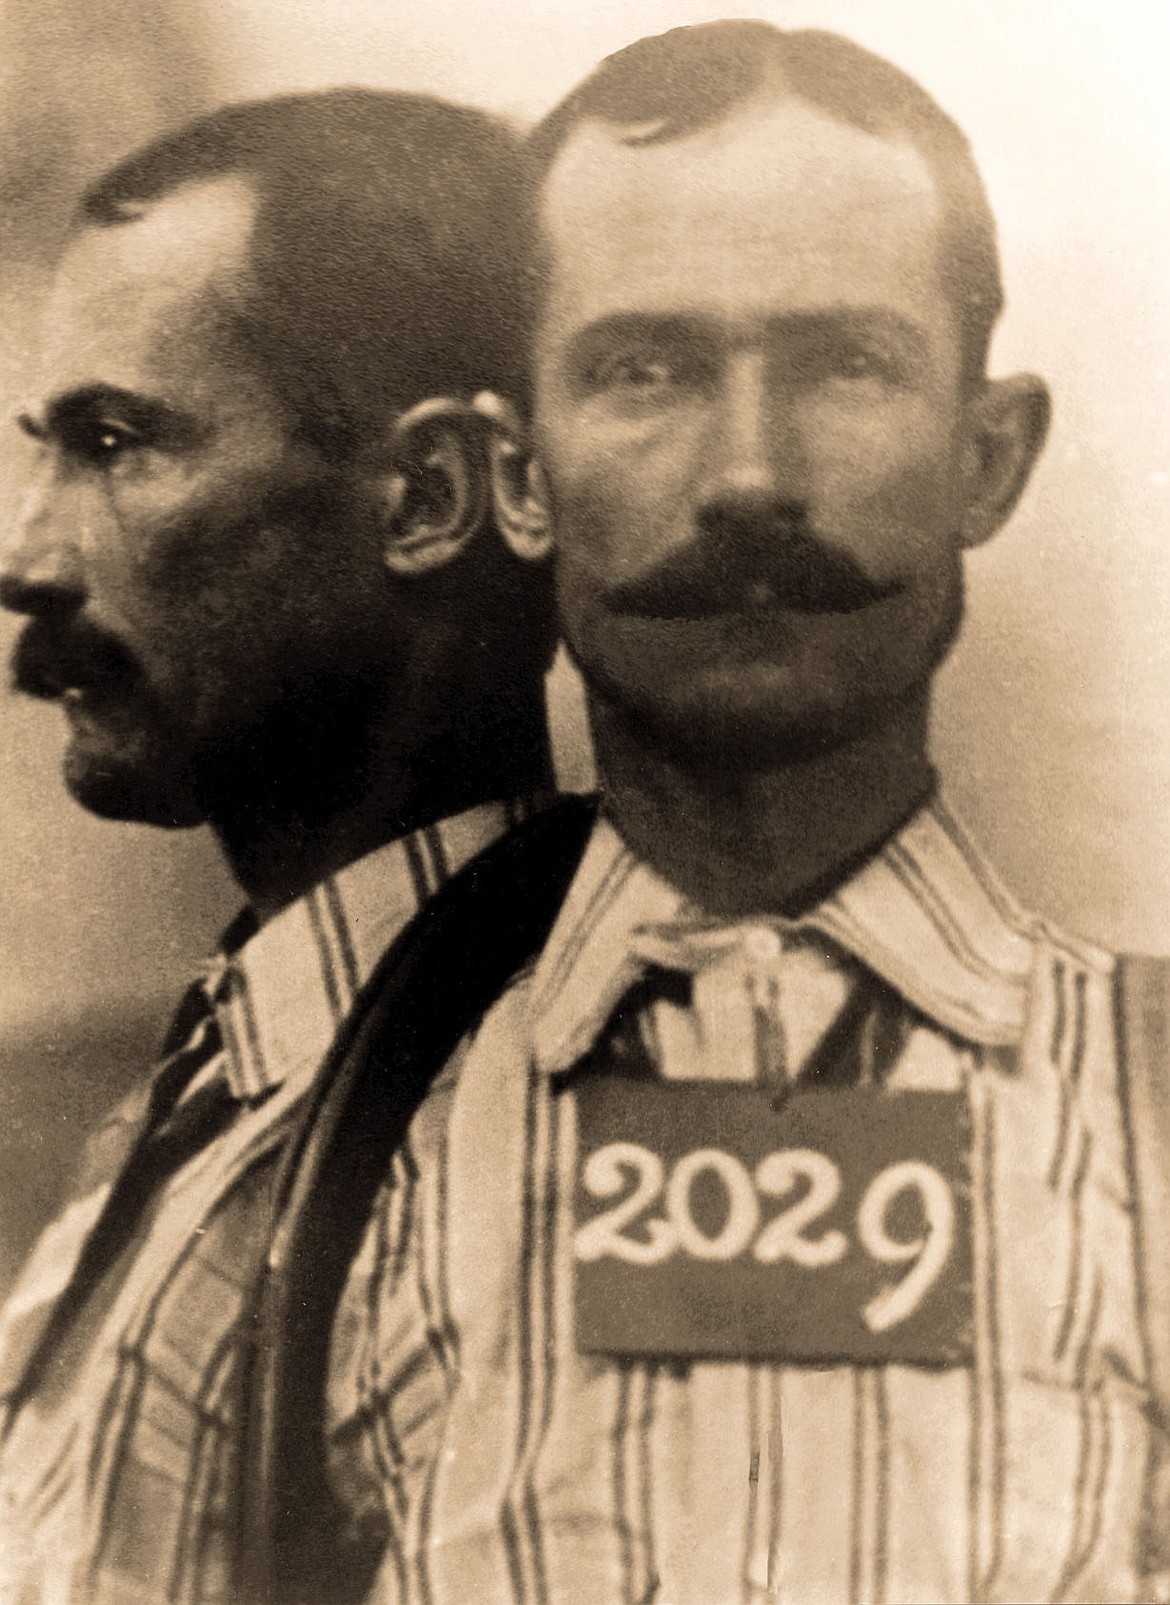 GOOGLE IMAGESManual Garcia, also called &#147;Three-Fingered Jack, was probably the most vicious member of Joaquin Murrieta&#146;s gang, delighting in torturing and killing Chinese working the gold fields.